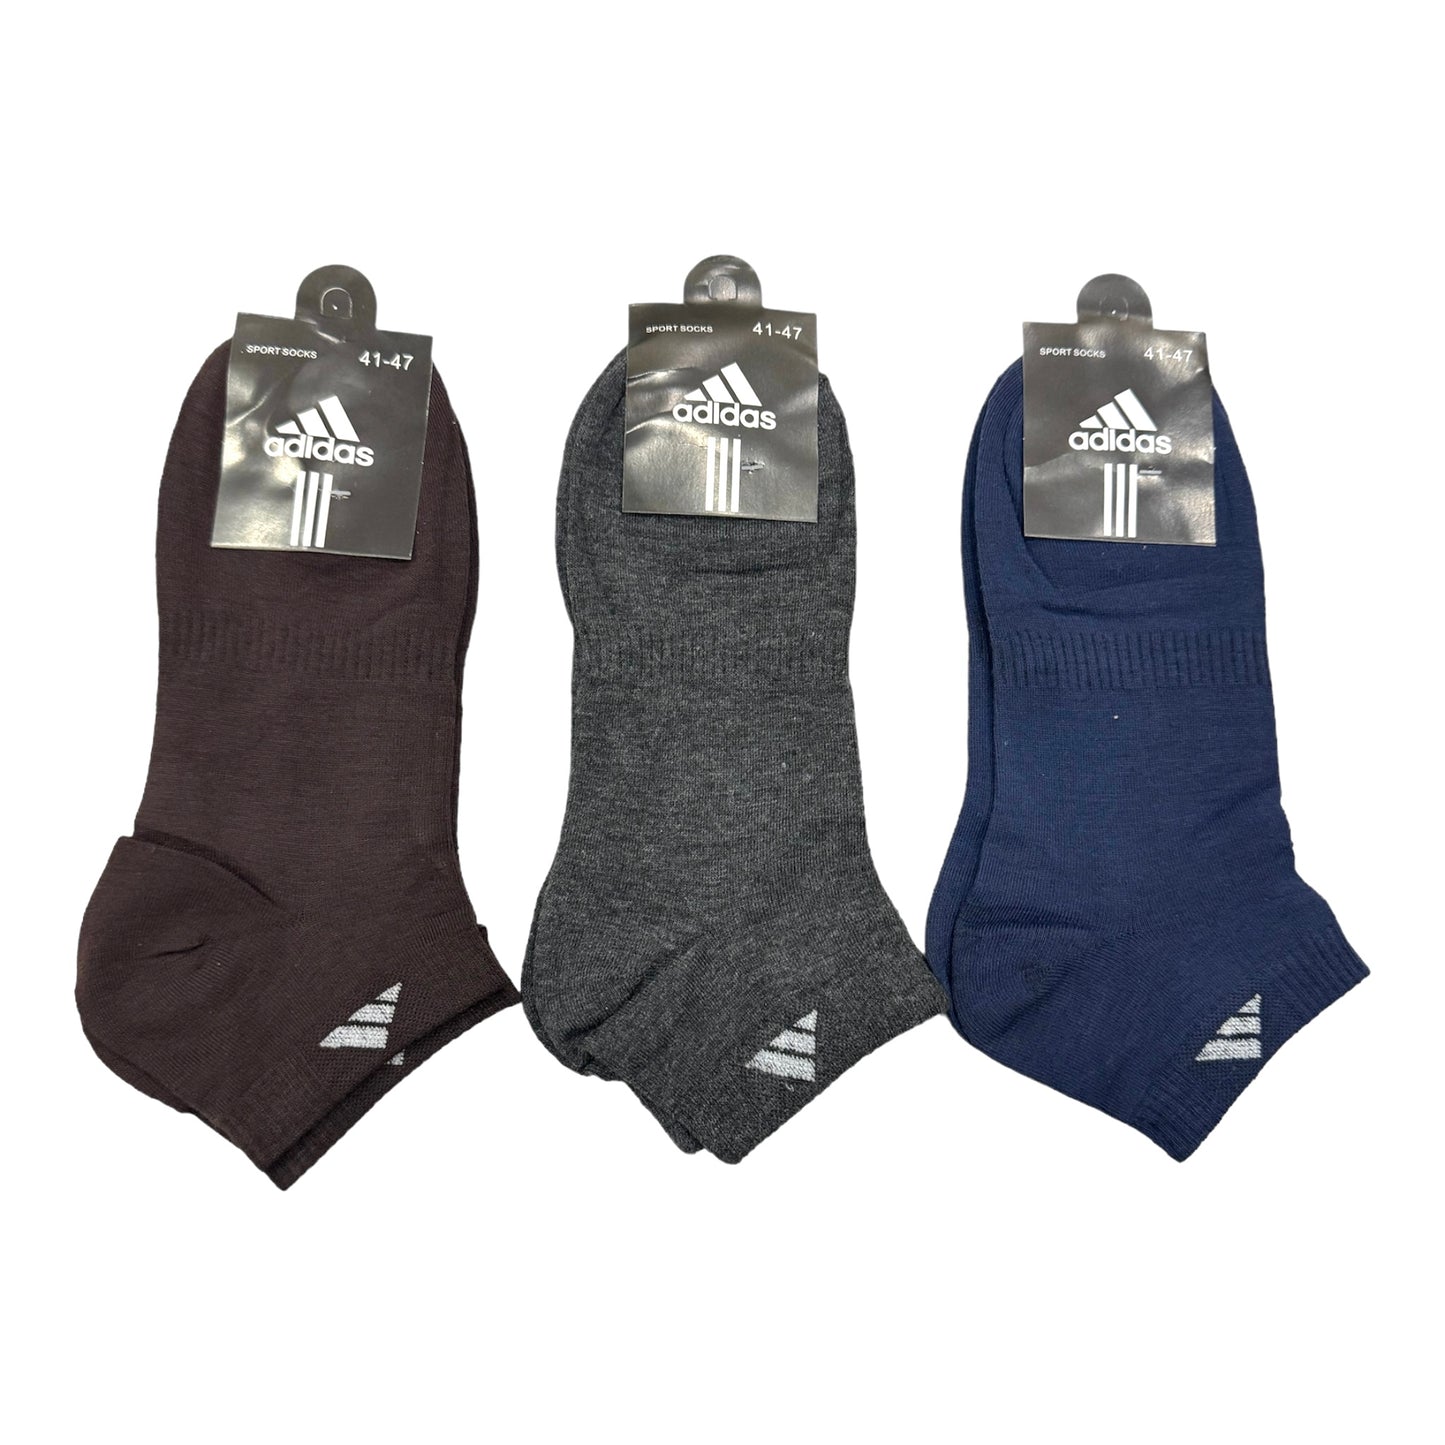 A-D-I-D-A-S Ankle Socks (Pack of 3)